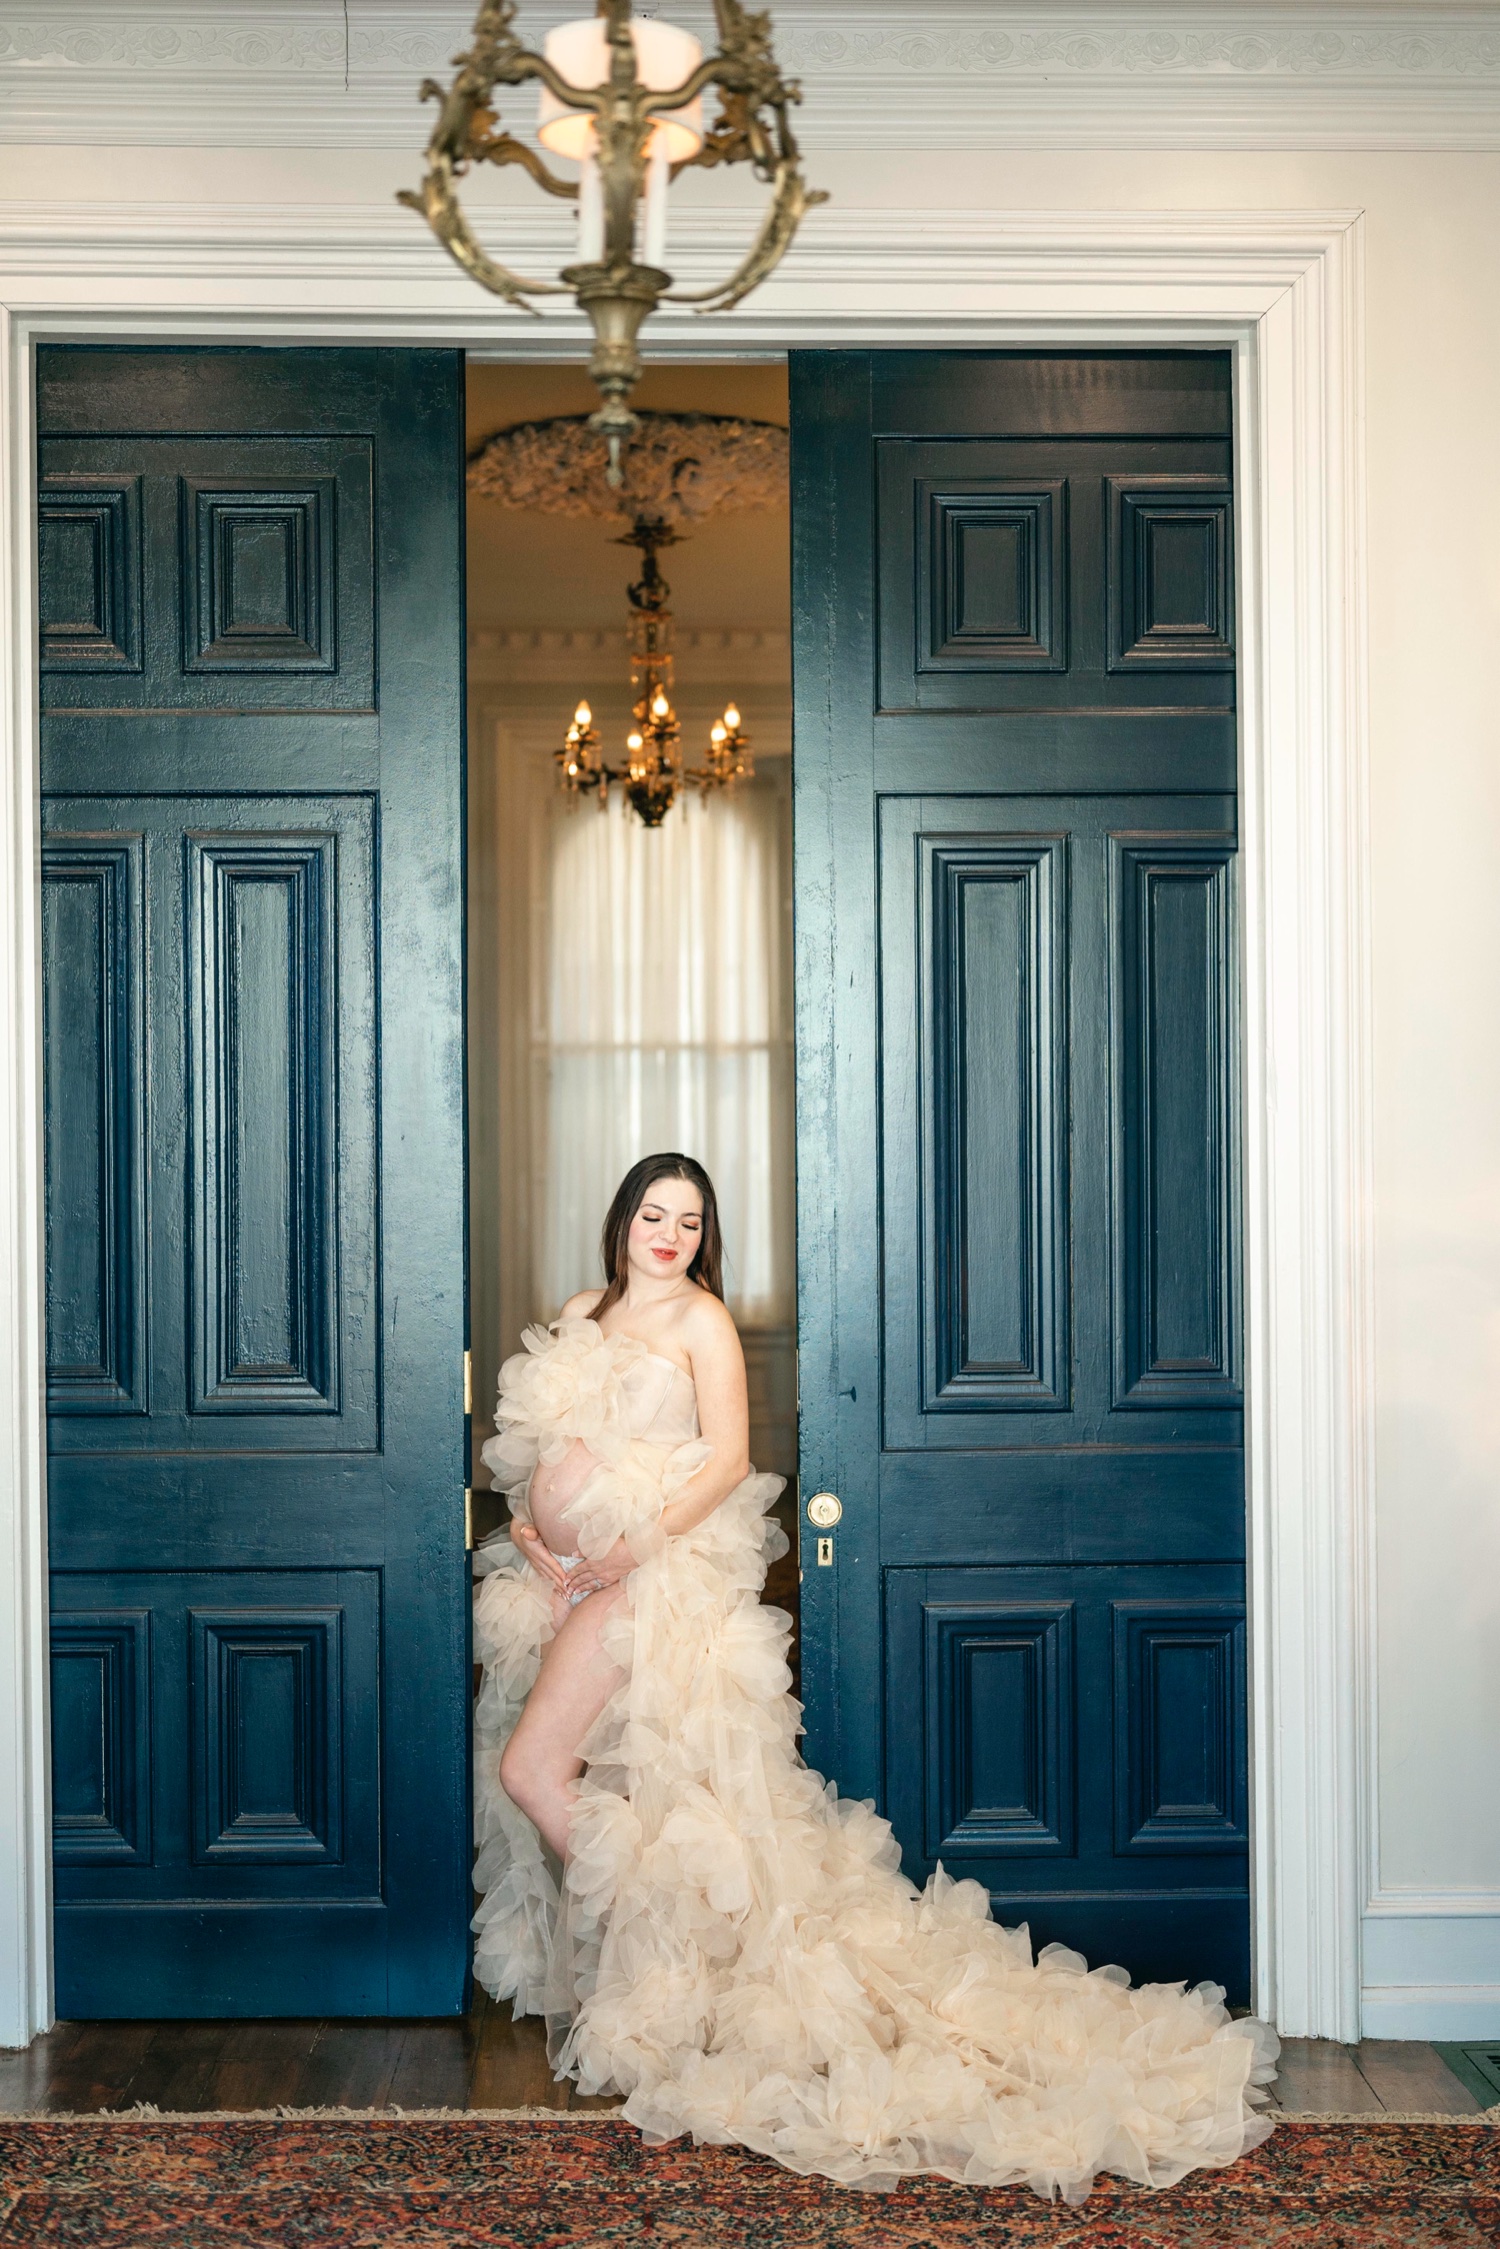 Winter Maternity Photos at Loch Aerie Mansion